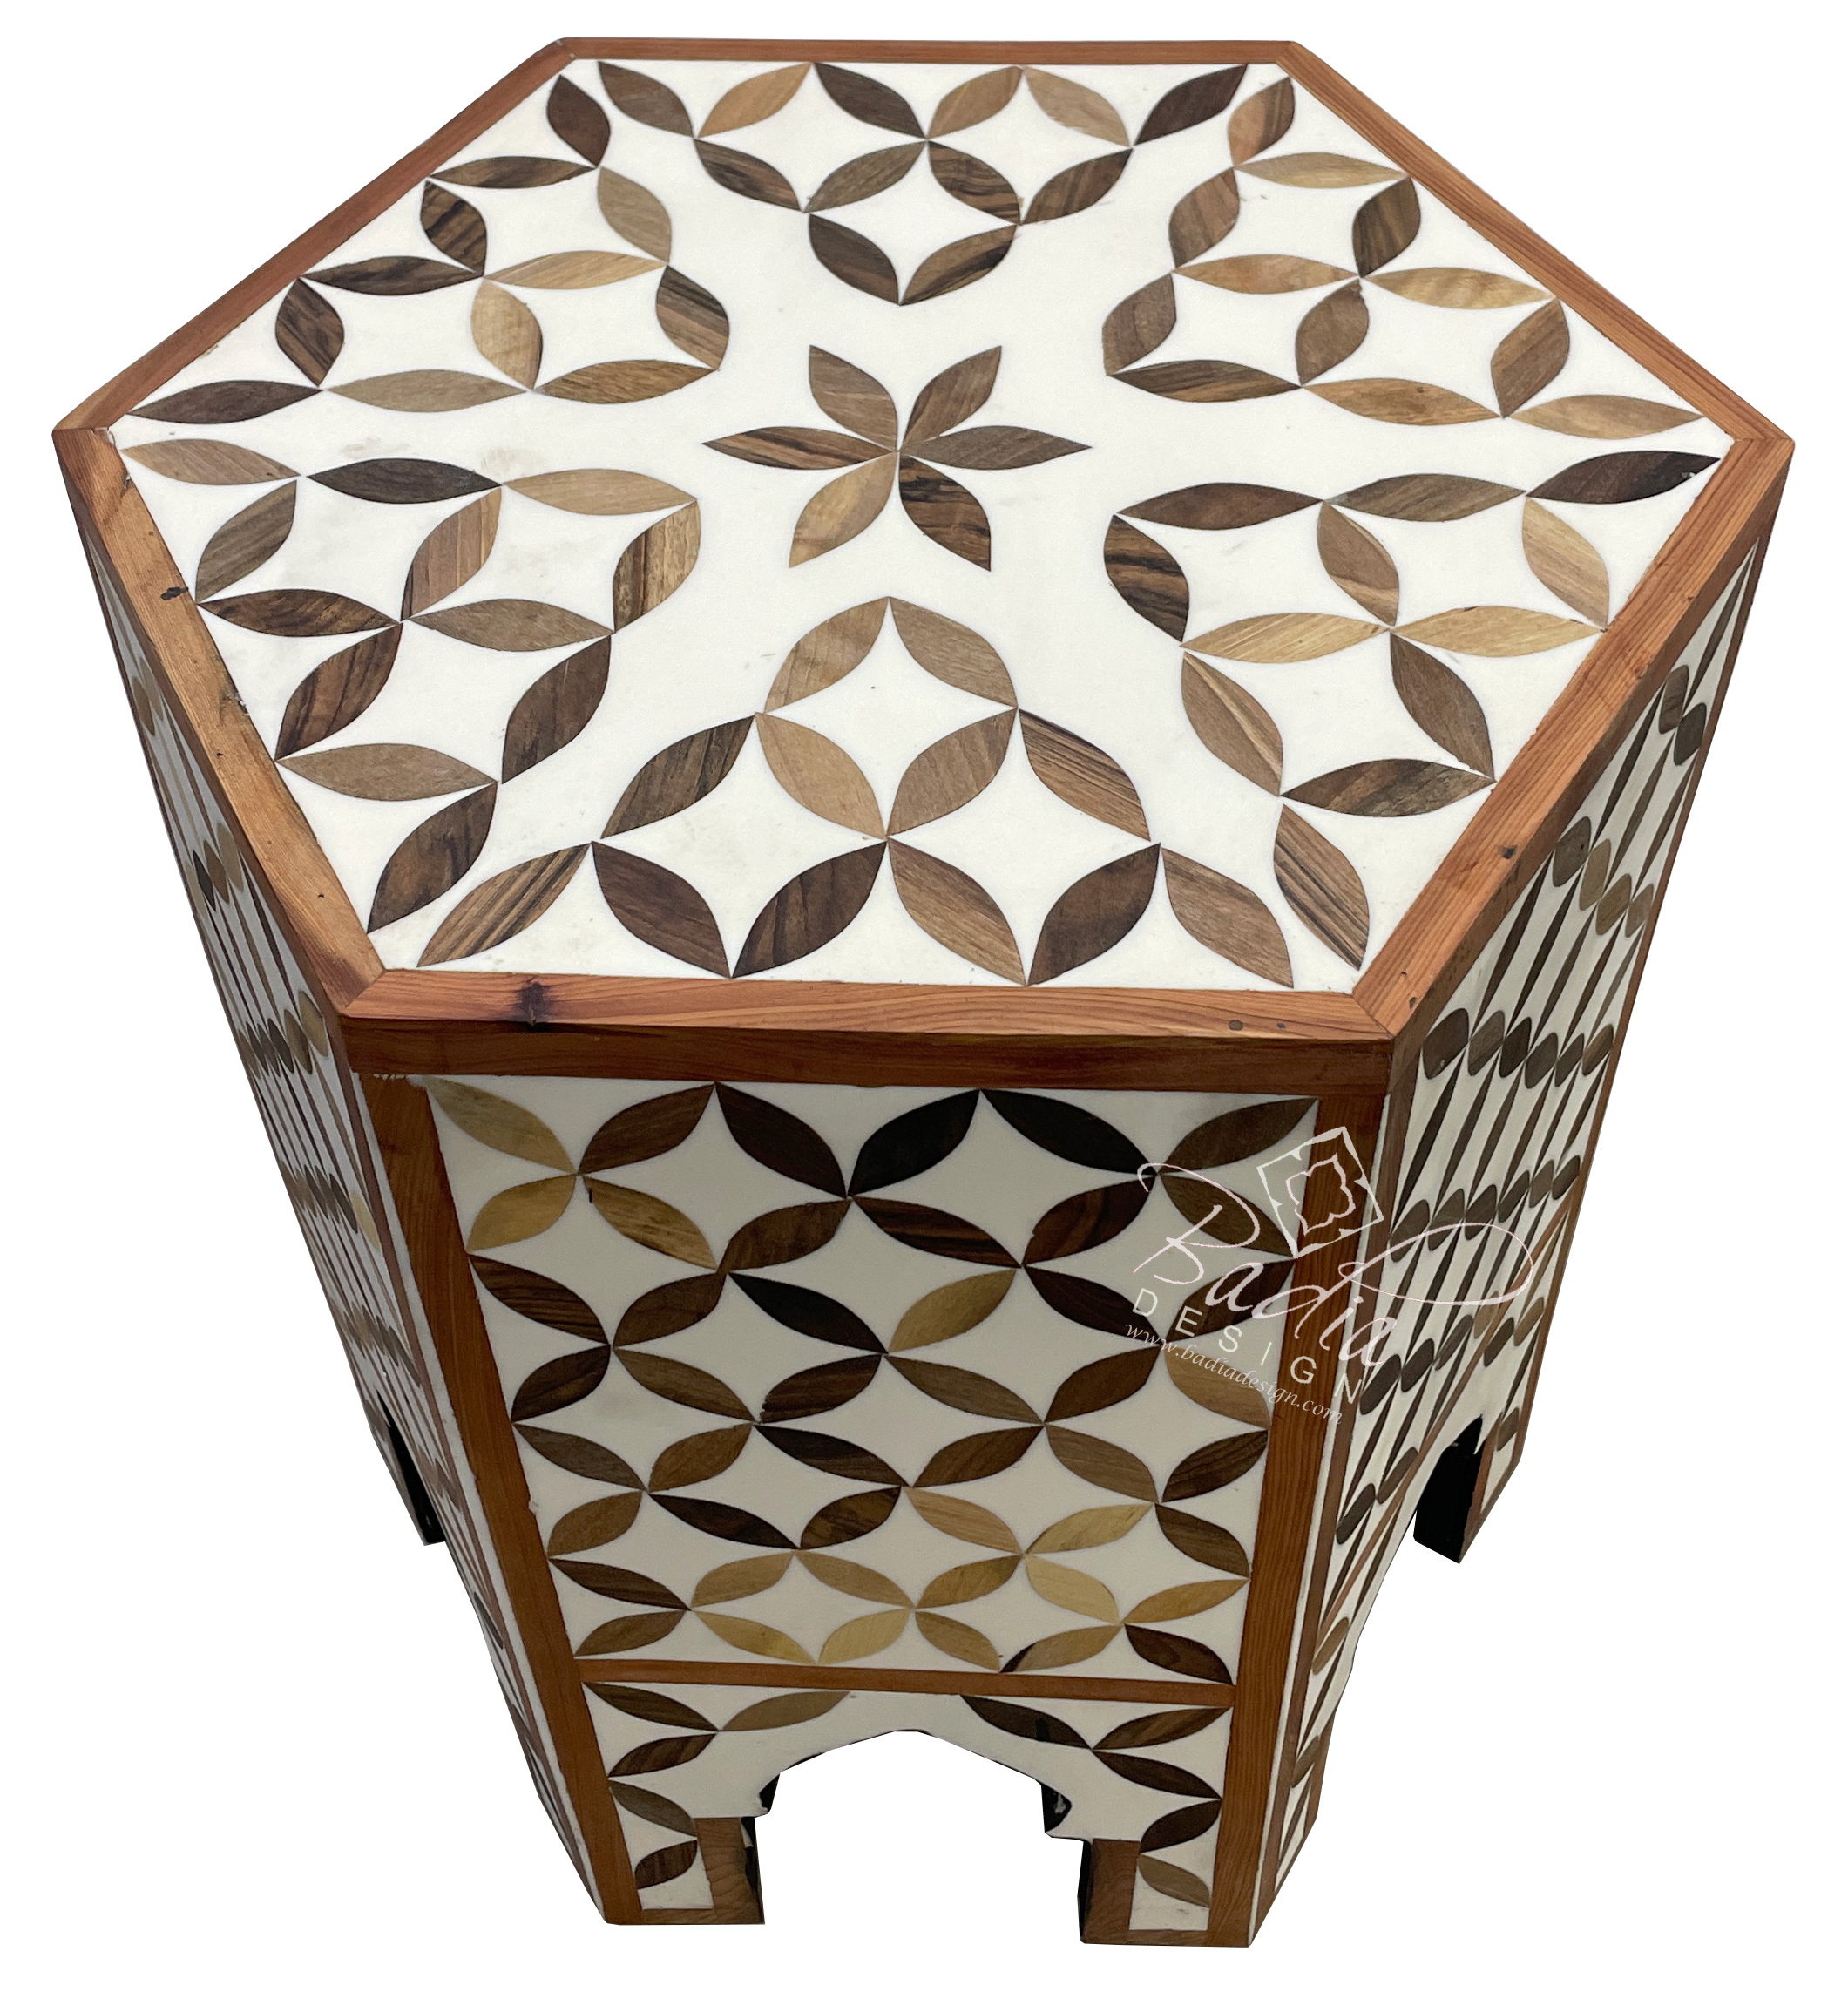 moroccan-brown-and-white-camel-bone-inlay-side-table-mop-st148.jpg